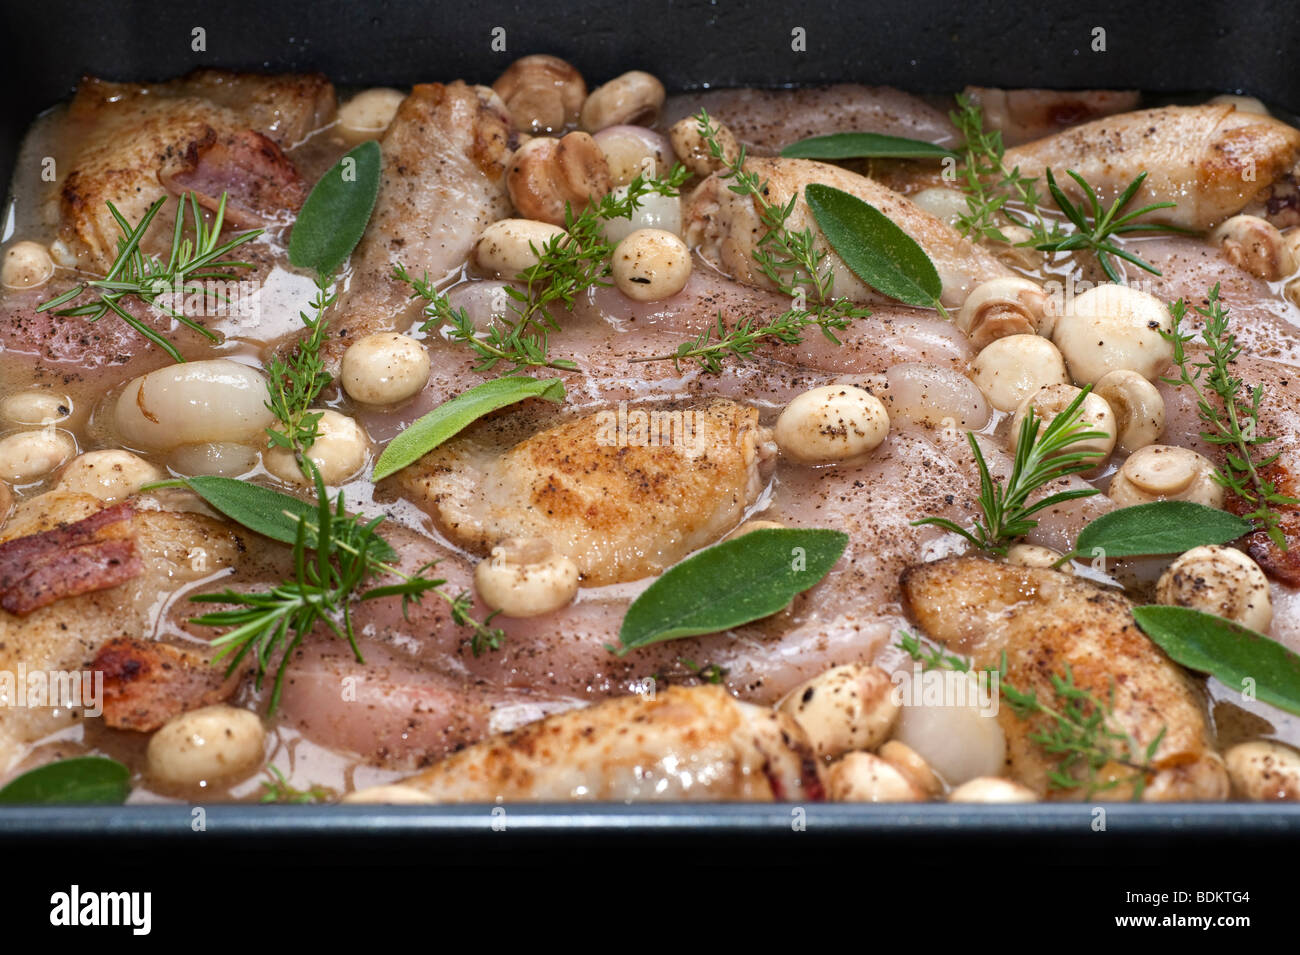 Chicken Casserole dish with herbs and mushrooms ready to be cooked in an oven Stock Photo